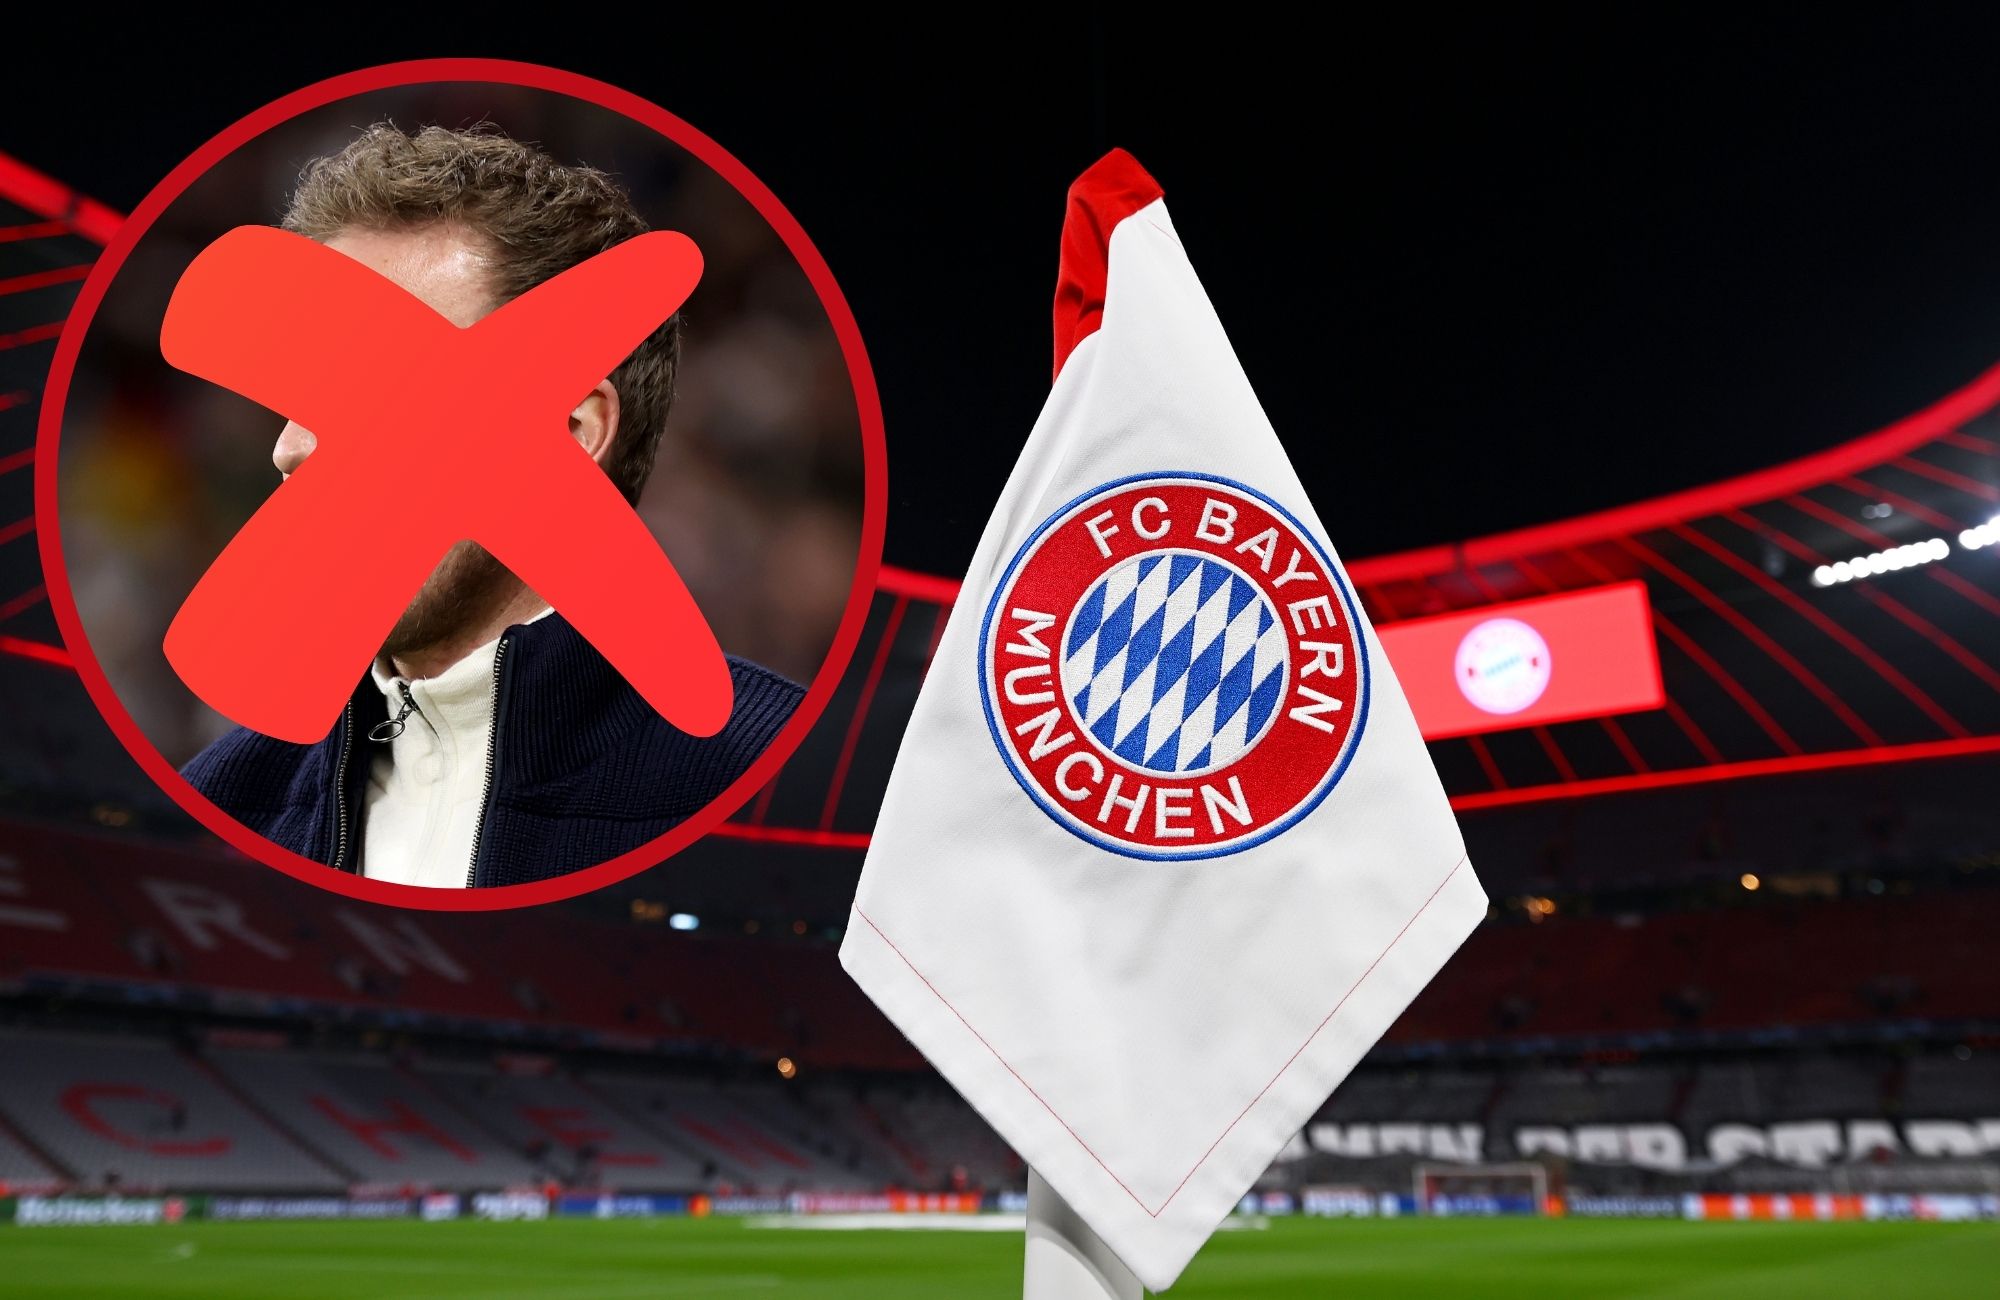 Nagelsmann’s Bayern snub could now see Munich snatch Liverpool managerial candidate